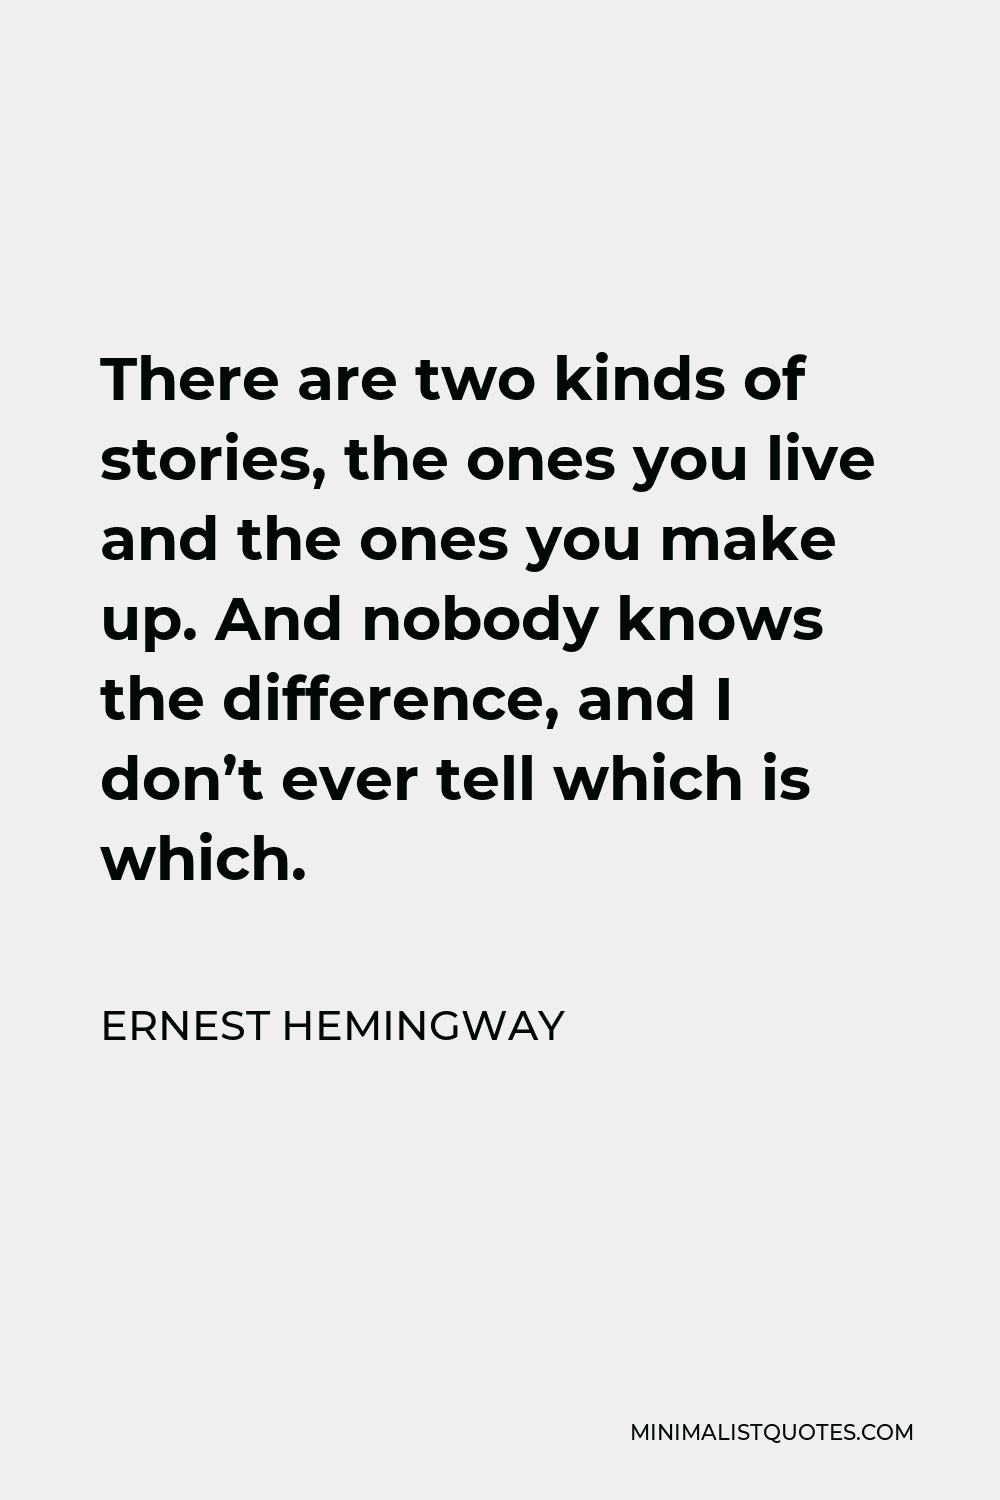 Ernest Hemingway Quote - There are two kinds of stories, the ones you live and the ones you make up. And nobody knows the difference, and I don’t ever tell which is which.